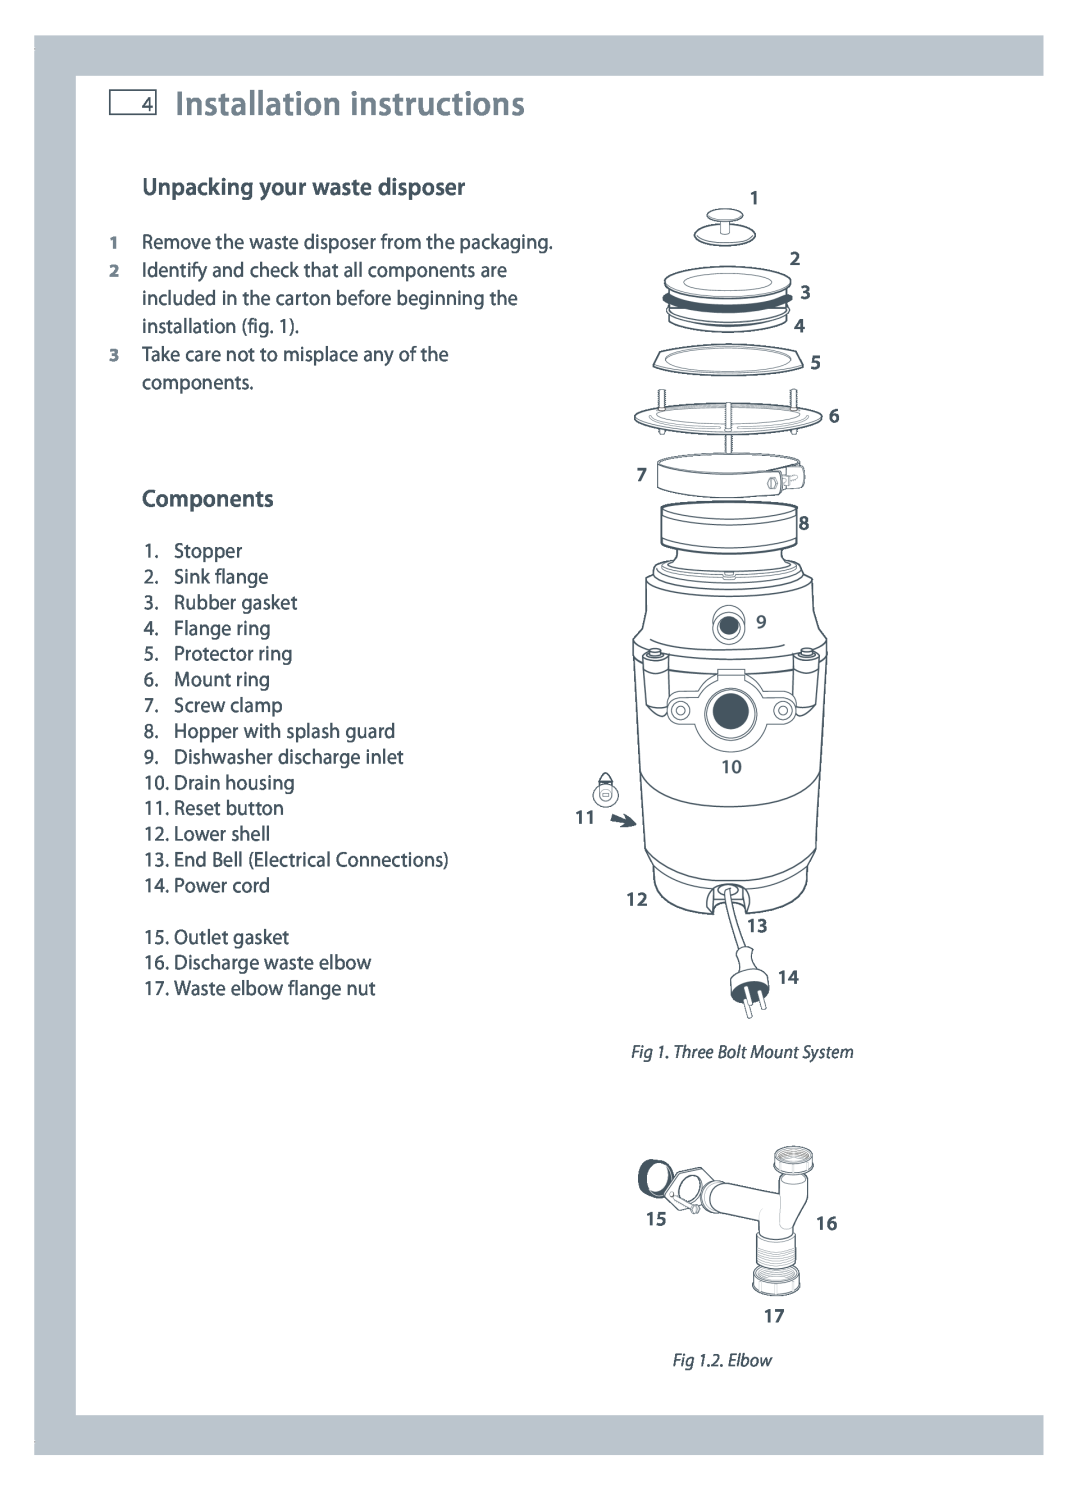 Fisher & Paykel GD50S1 installation instructions Unpacking your waste disposer, Components, Installation instructions 